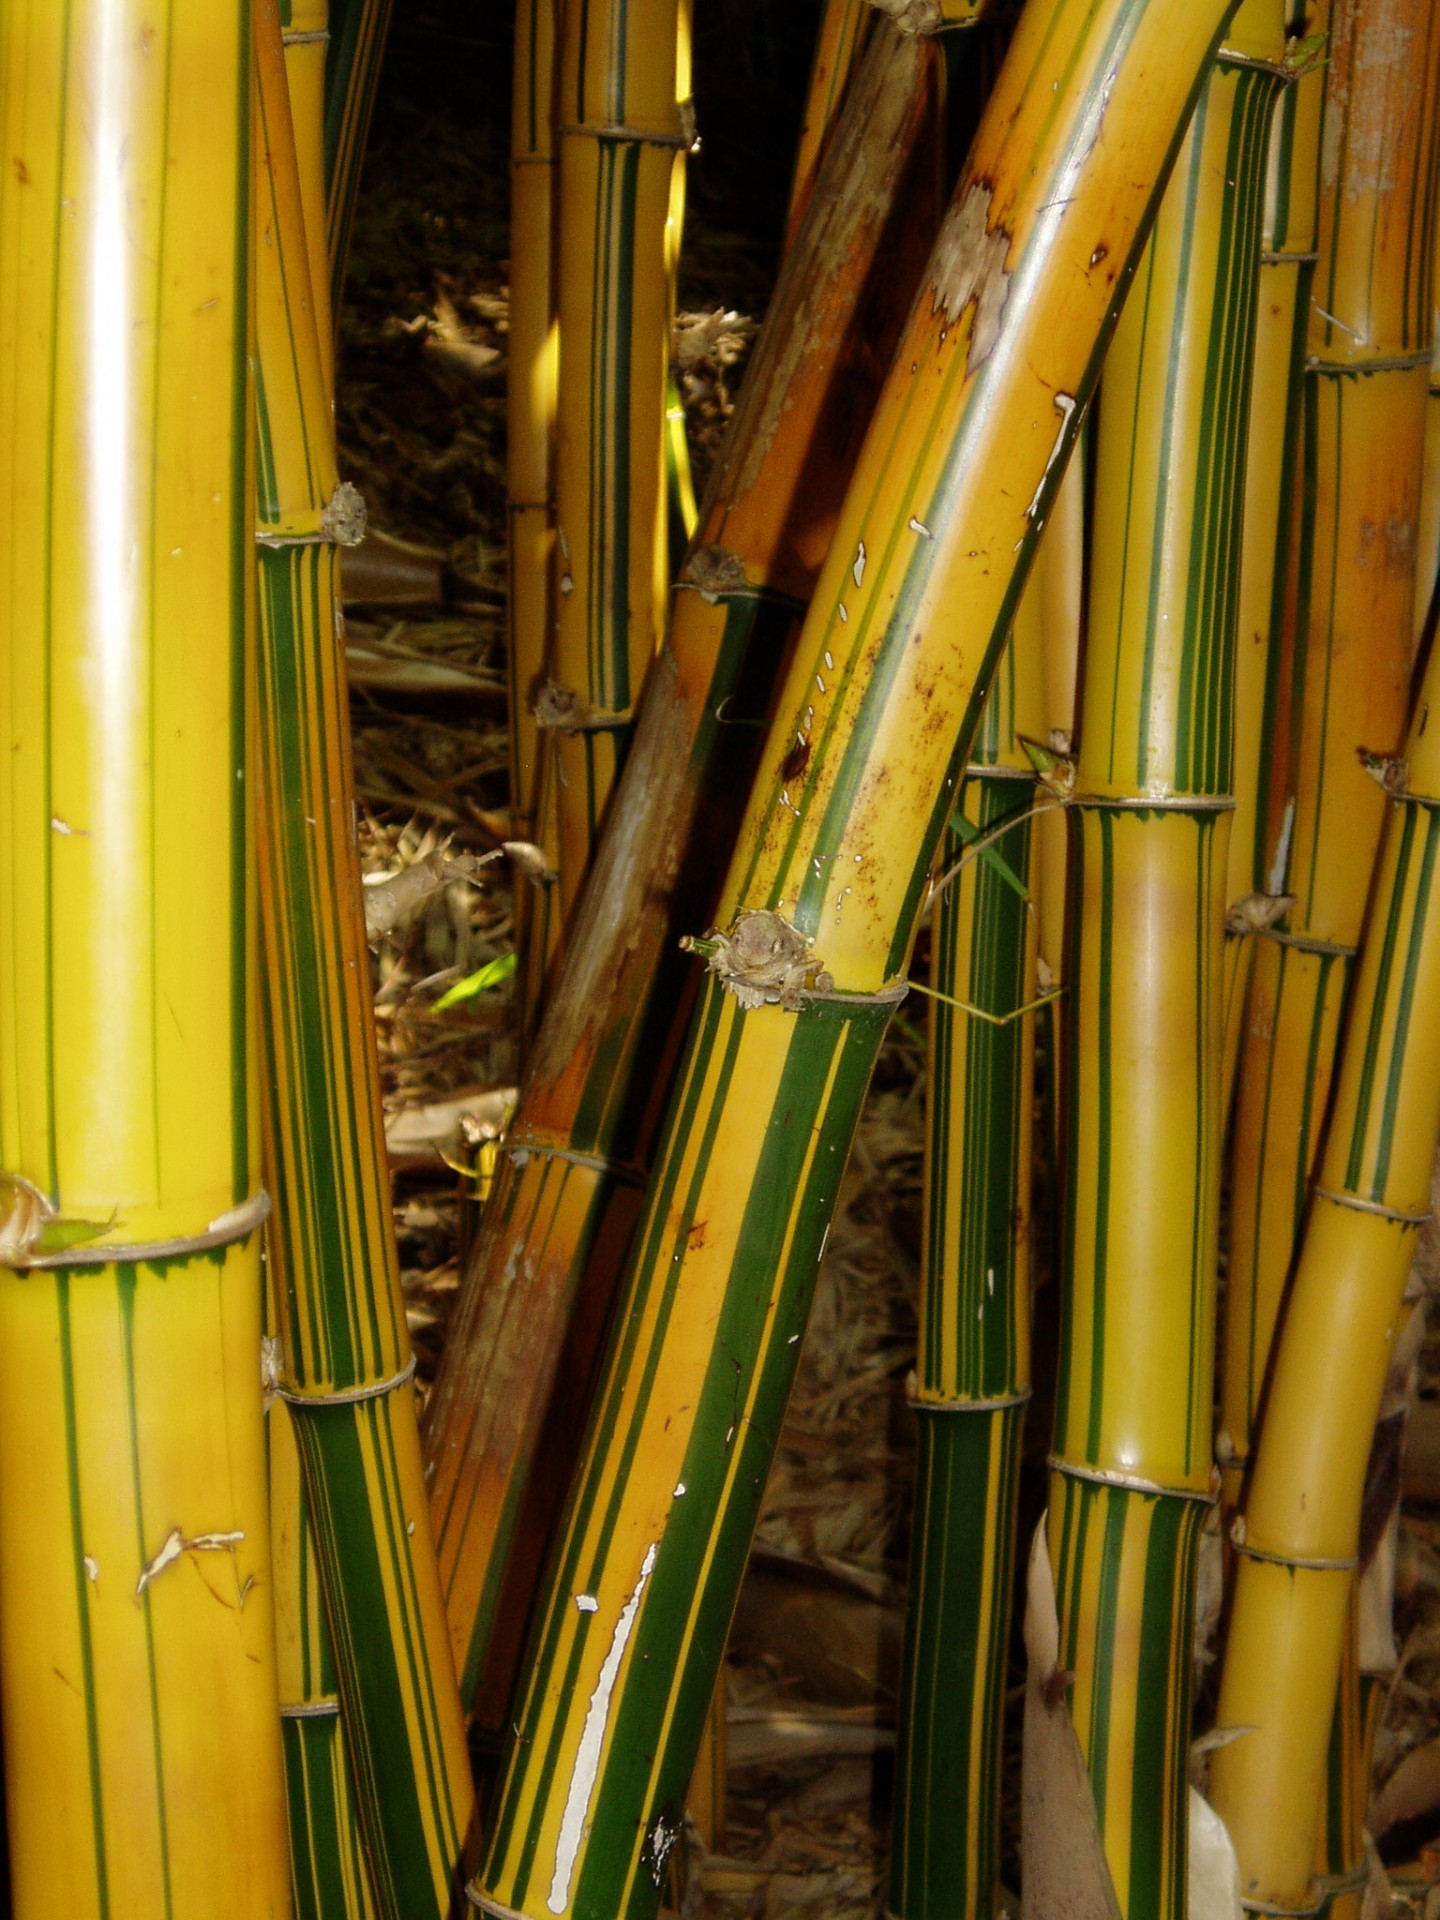 Bamboo pictate